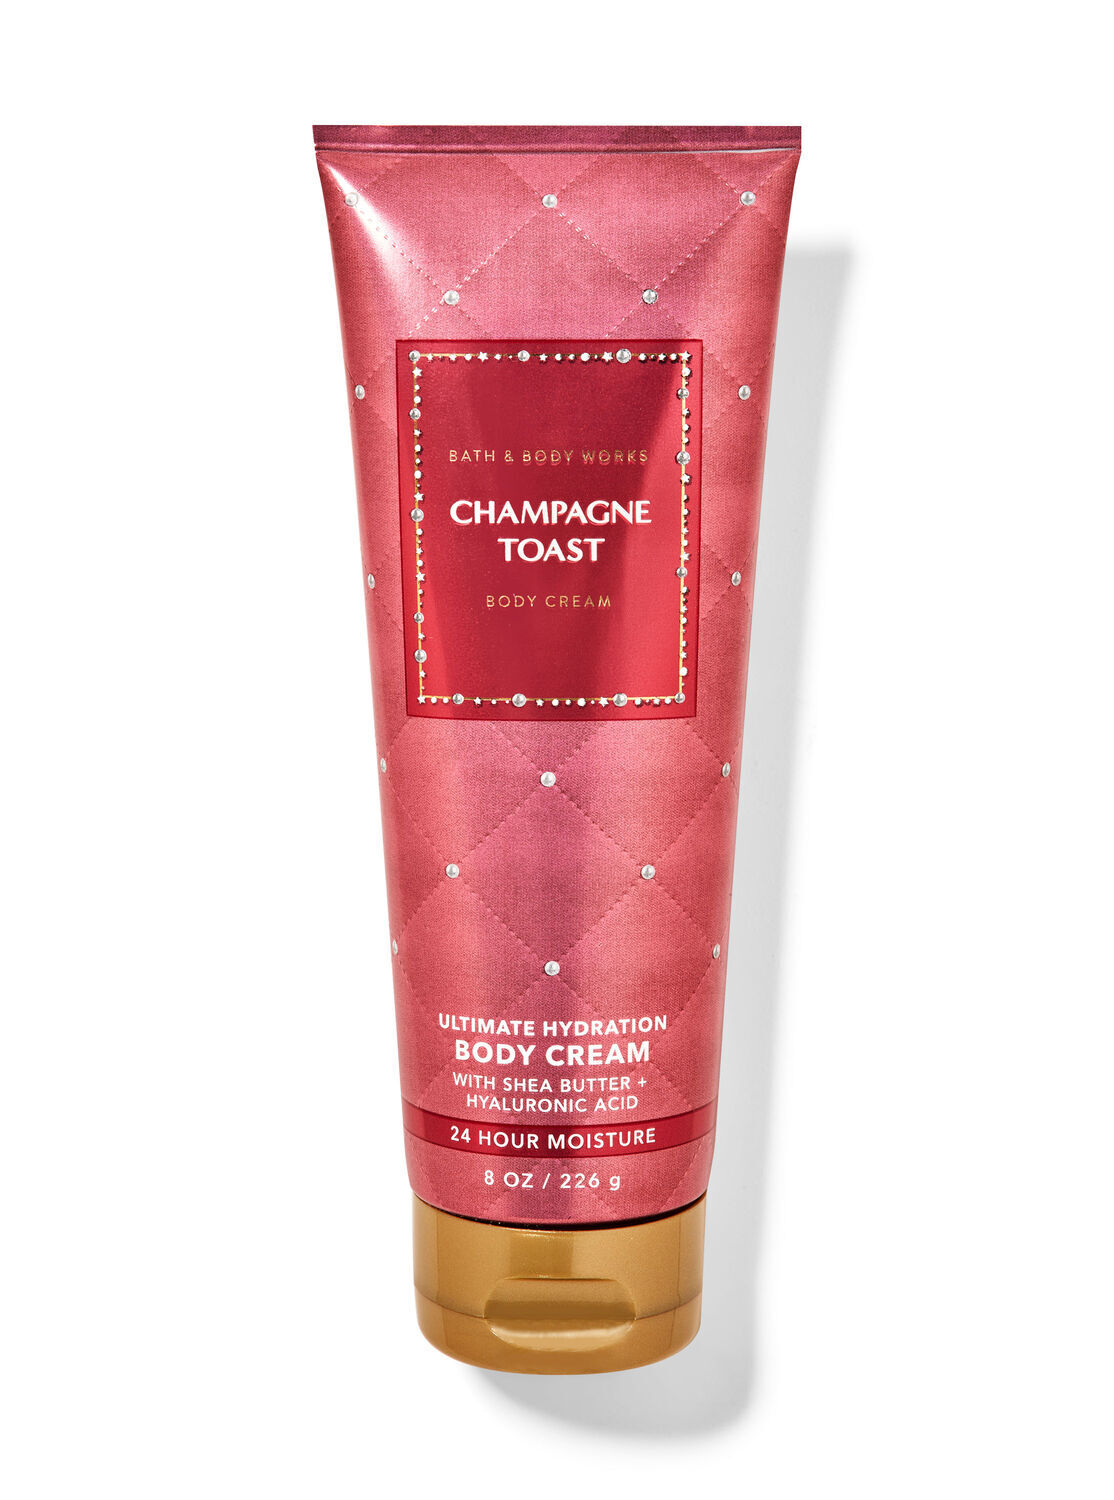 Bath and Body Works Champagne Toast Body Cream (parallel imported goods)